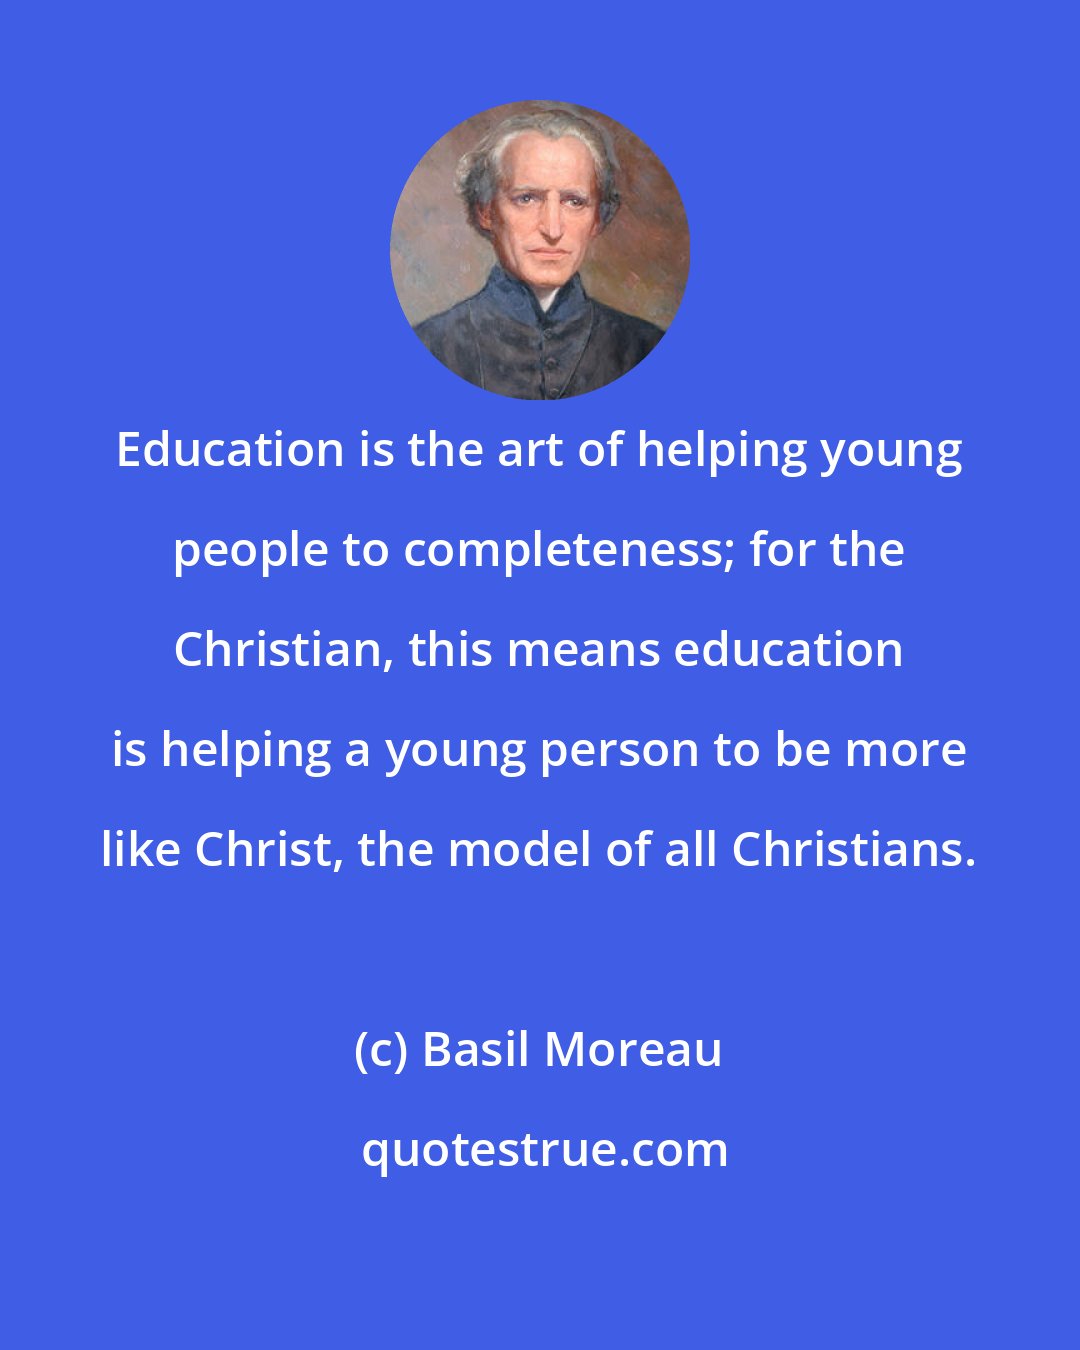 Basil Moreau: Education is the art of helping young people to completeness; for the Christian, this means education is helping a young person to be more like Christ, the model of all Christians.